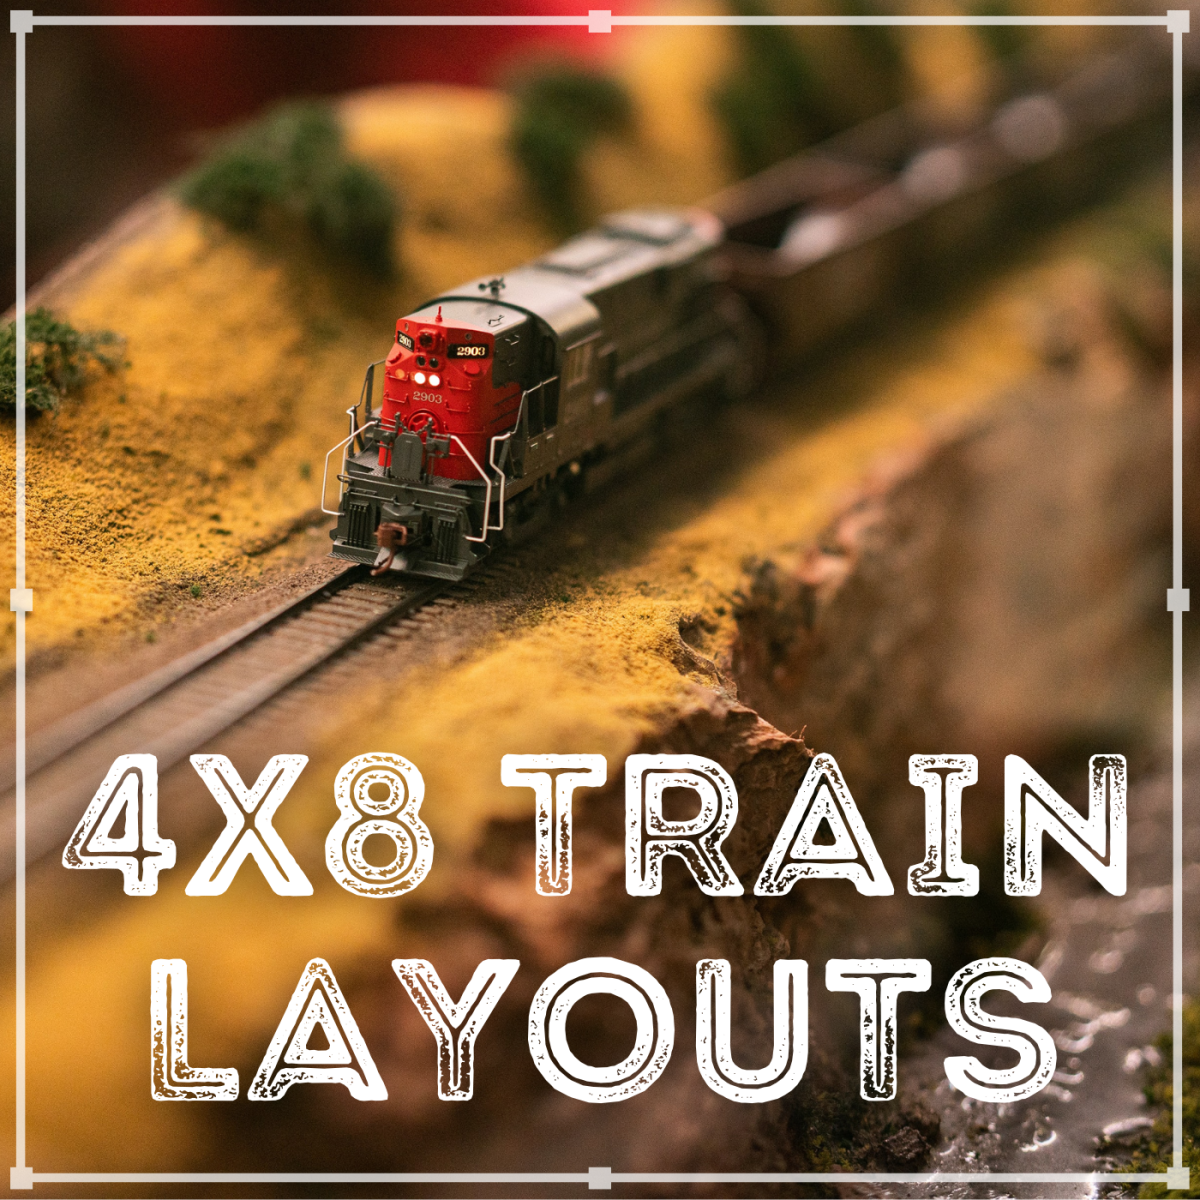 If you're looking to get started in model railroading with a 4x8 track plan, find plenty of ideas in this article.